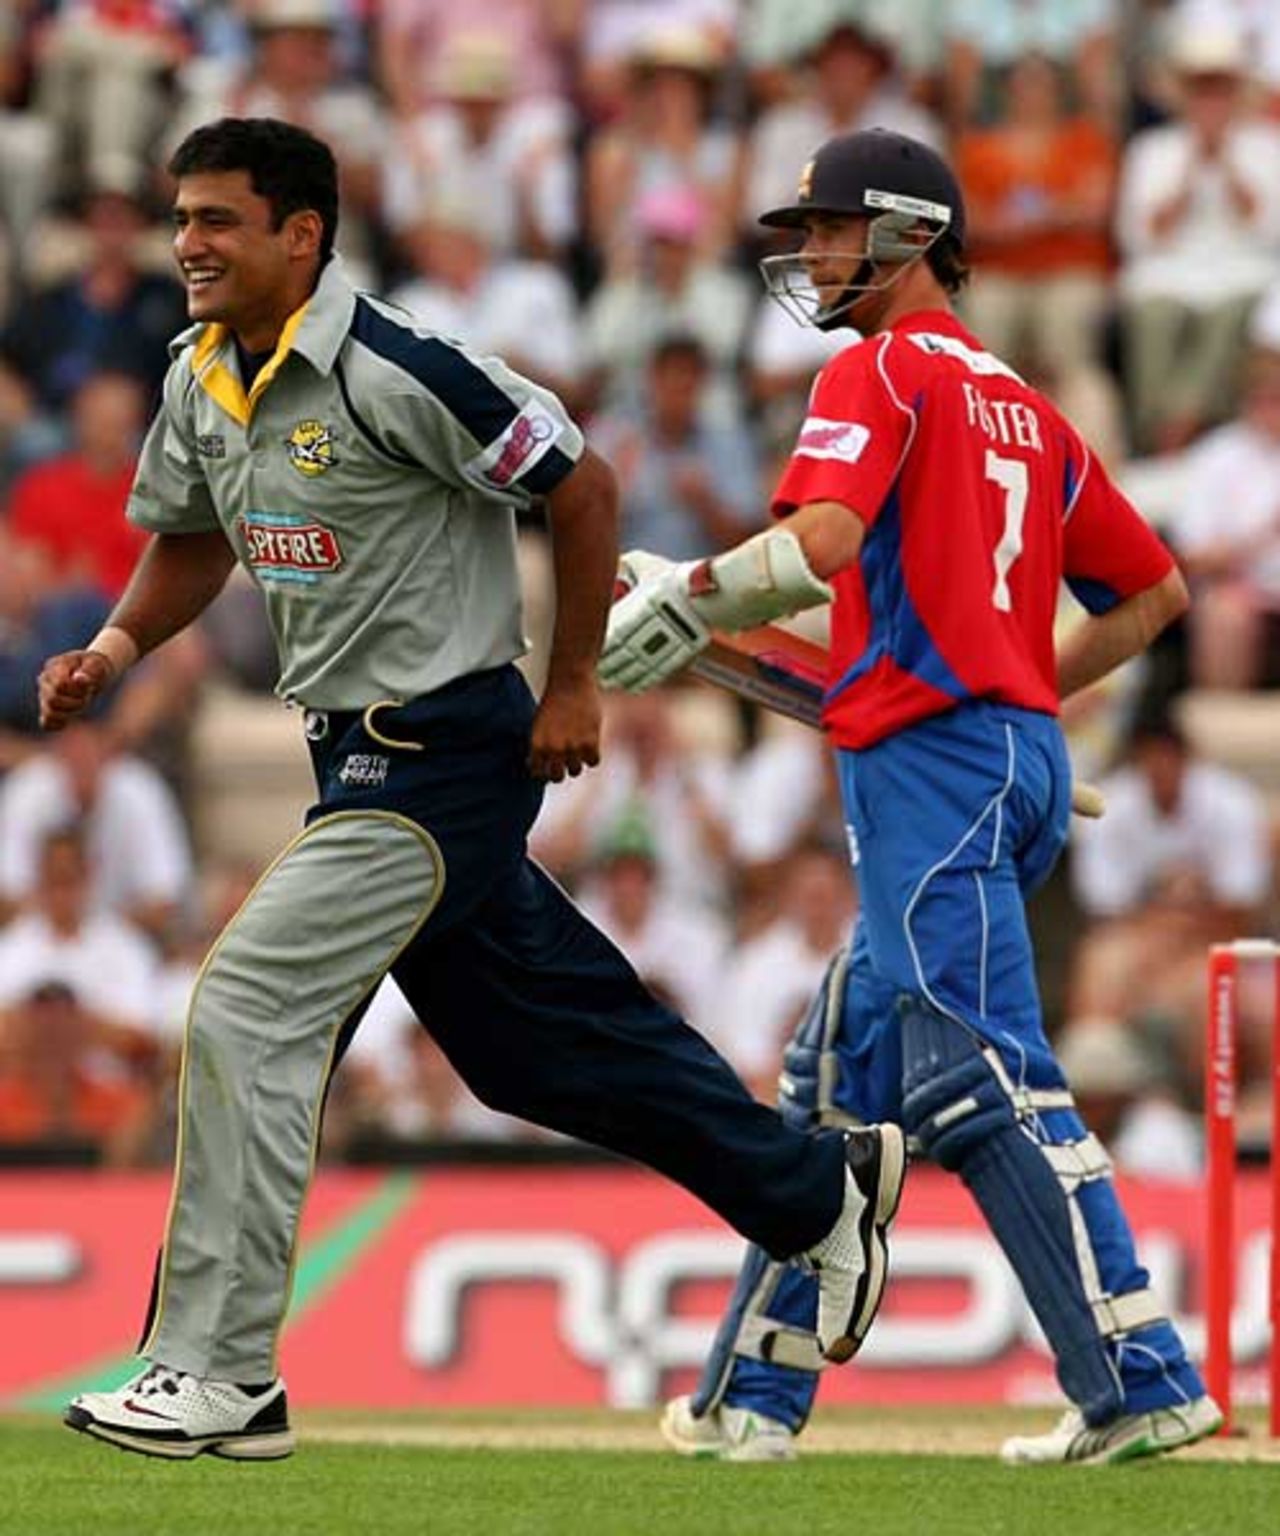 Yasir Arafat was superb at the end of the innings, Essex v Kent, 1st Twenty20 semi-final, The Rose Bowl, July 26, 2008